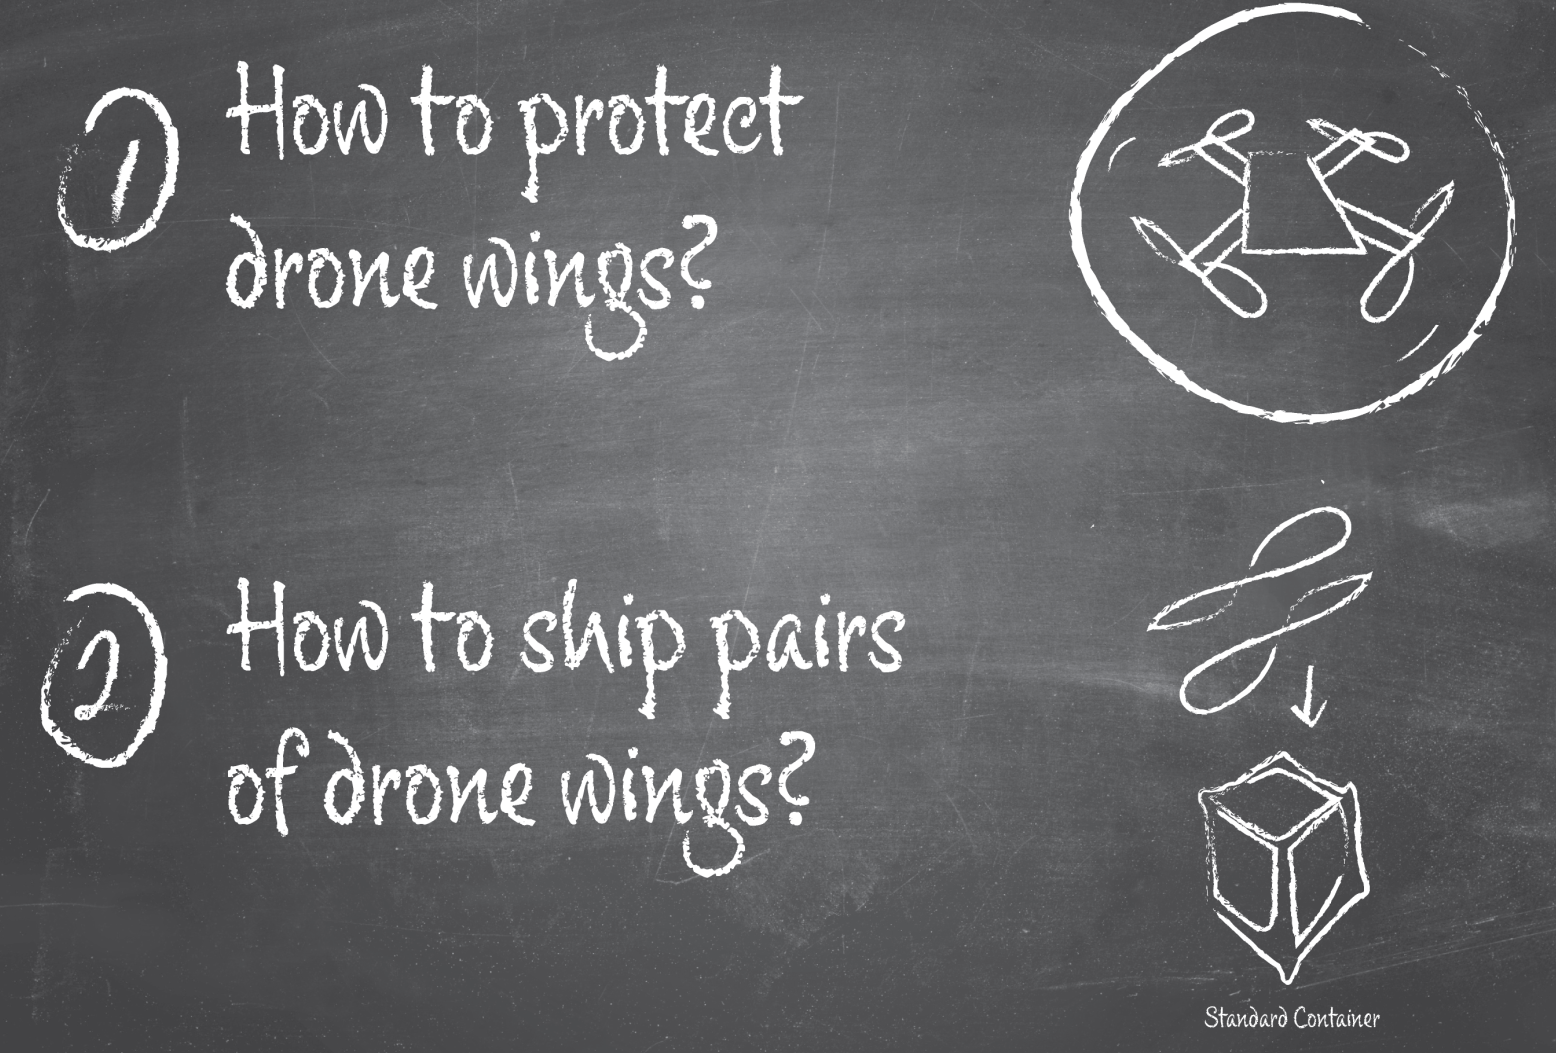 How to ship drone wings